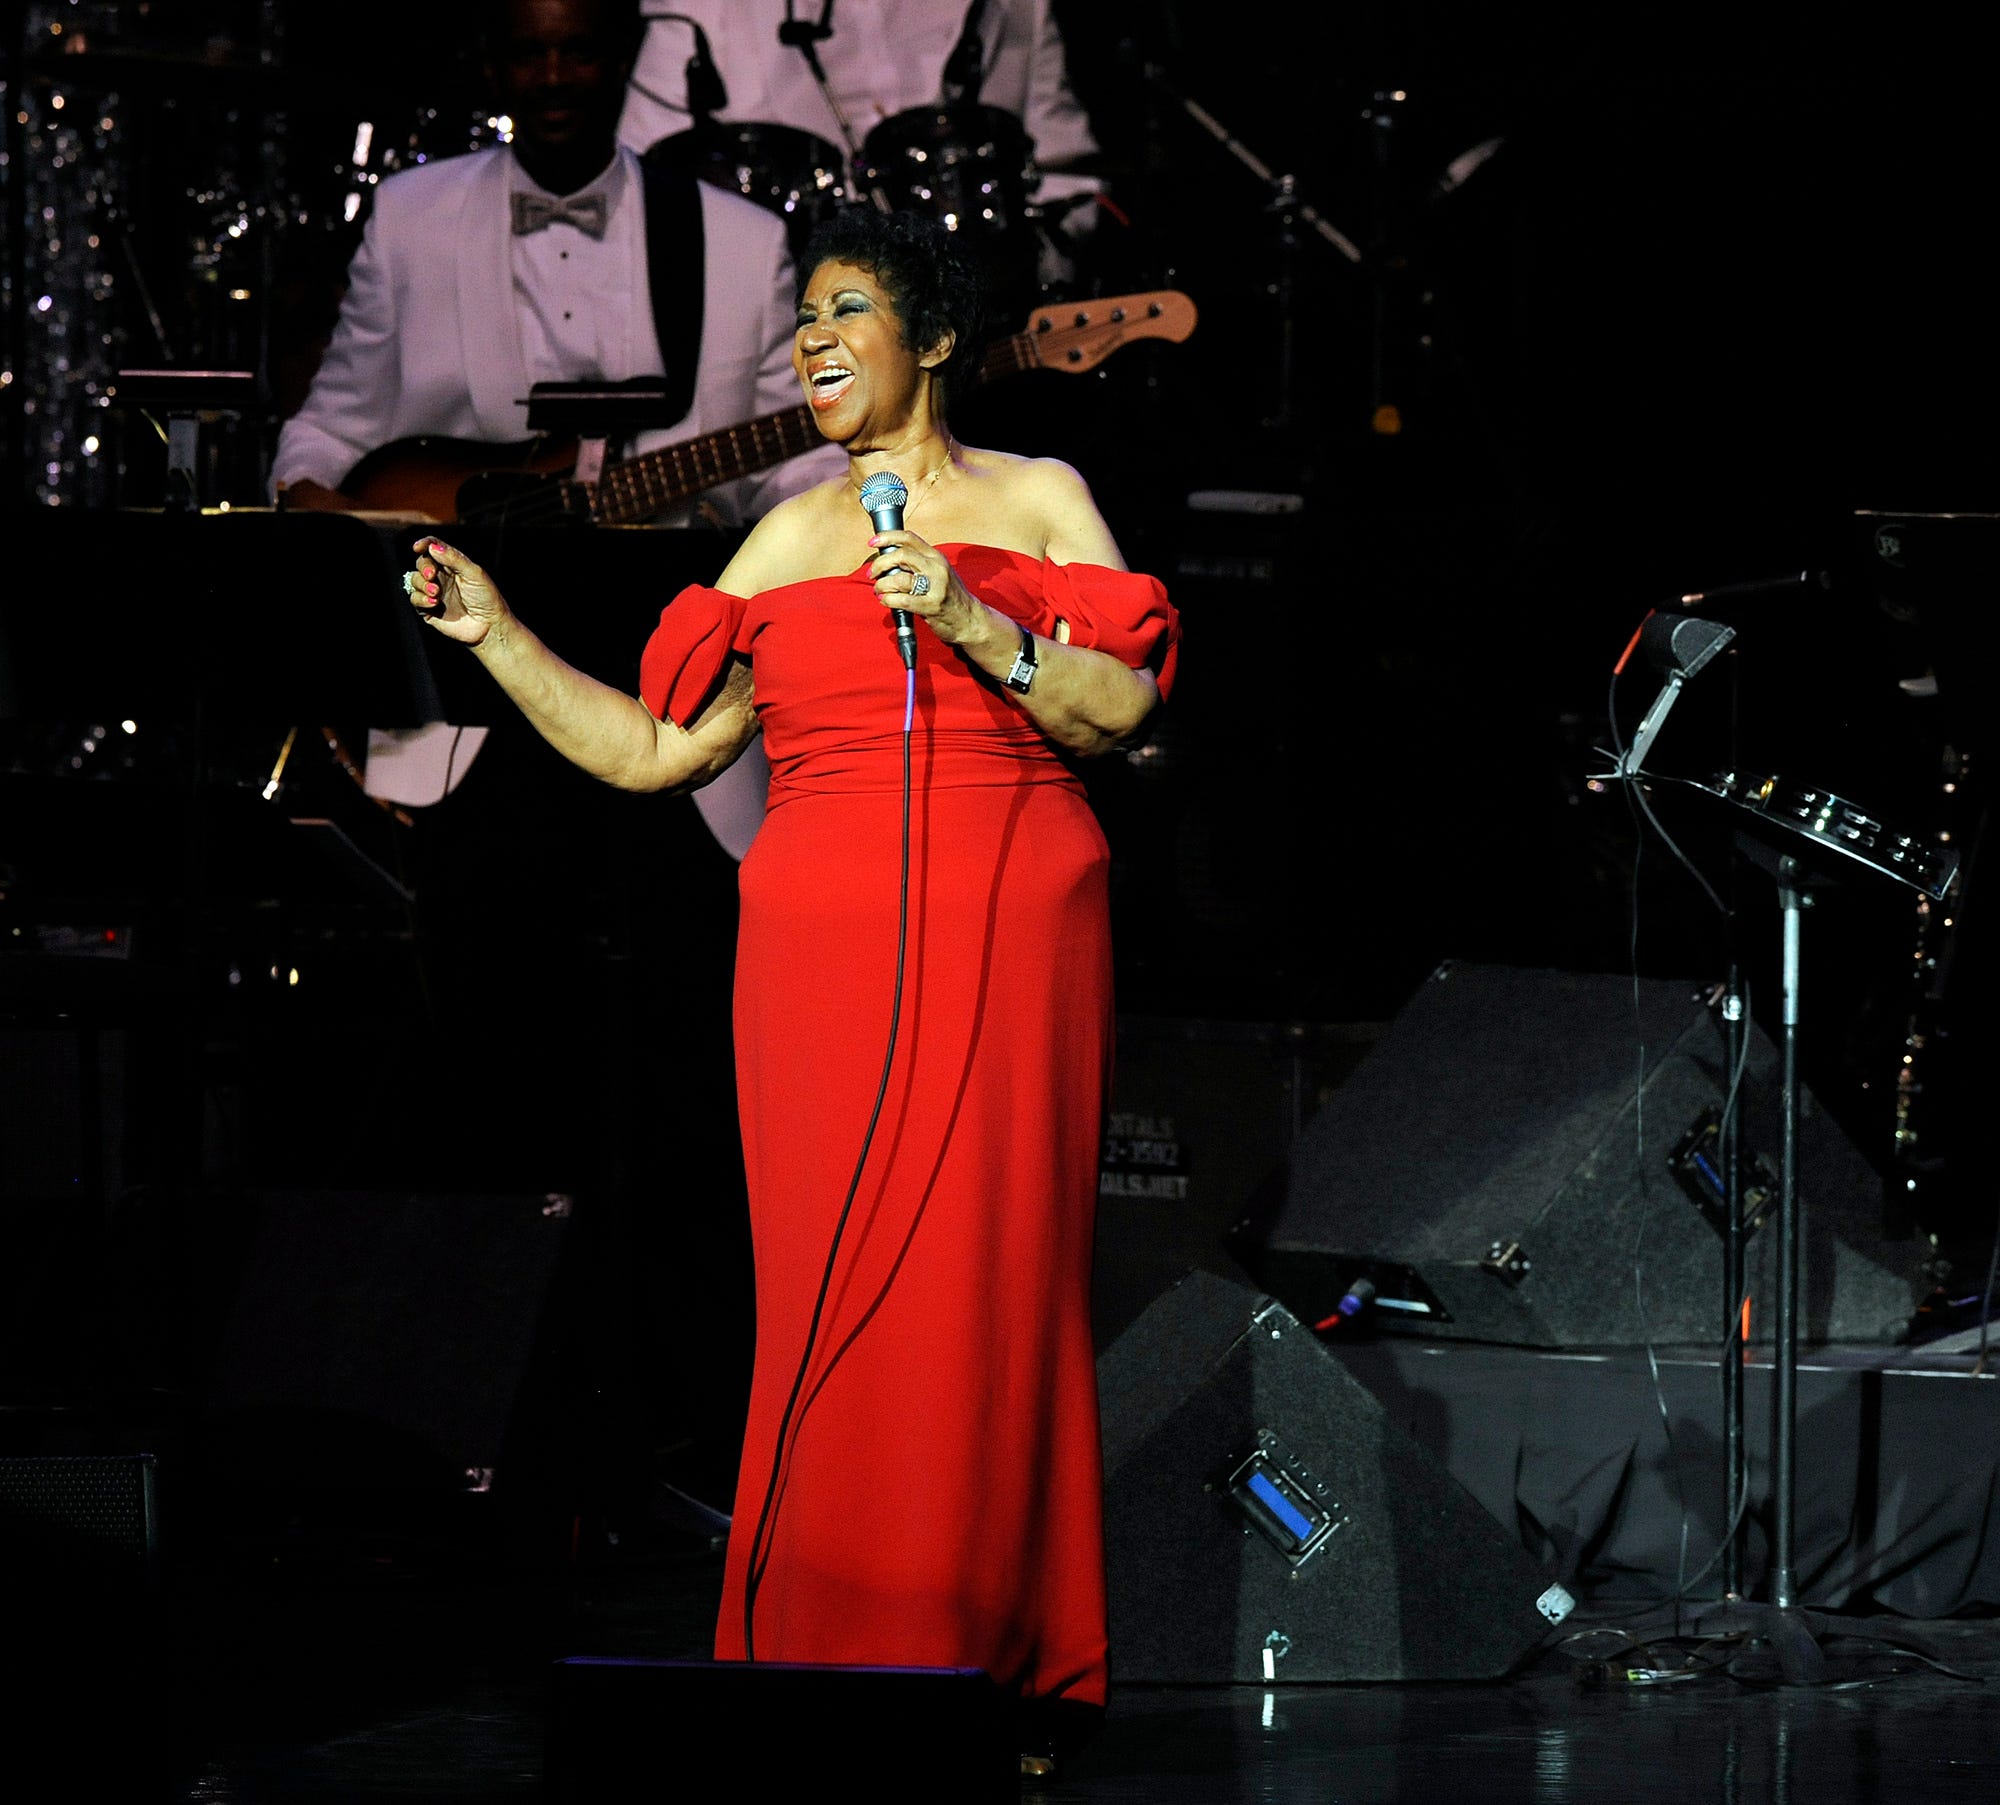 Aretha Franklin performed "Until You Come Back To Me" during her concert held at DTE Energy Music Theater in Clarkston, Mich., on  July 12, 2014.